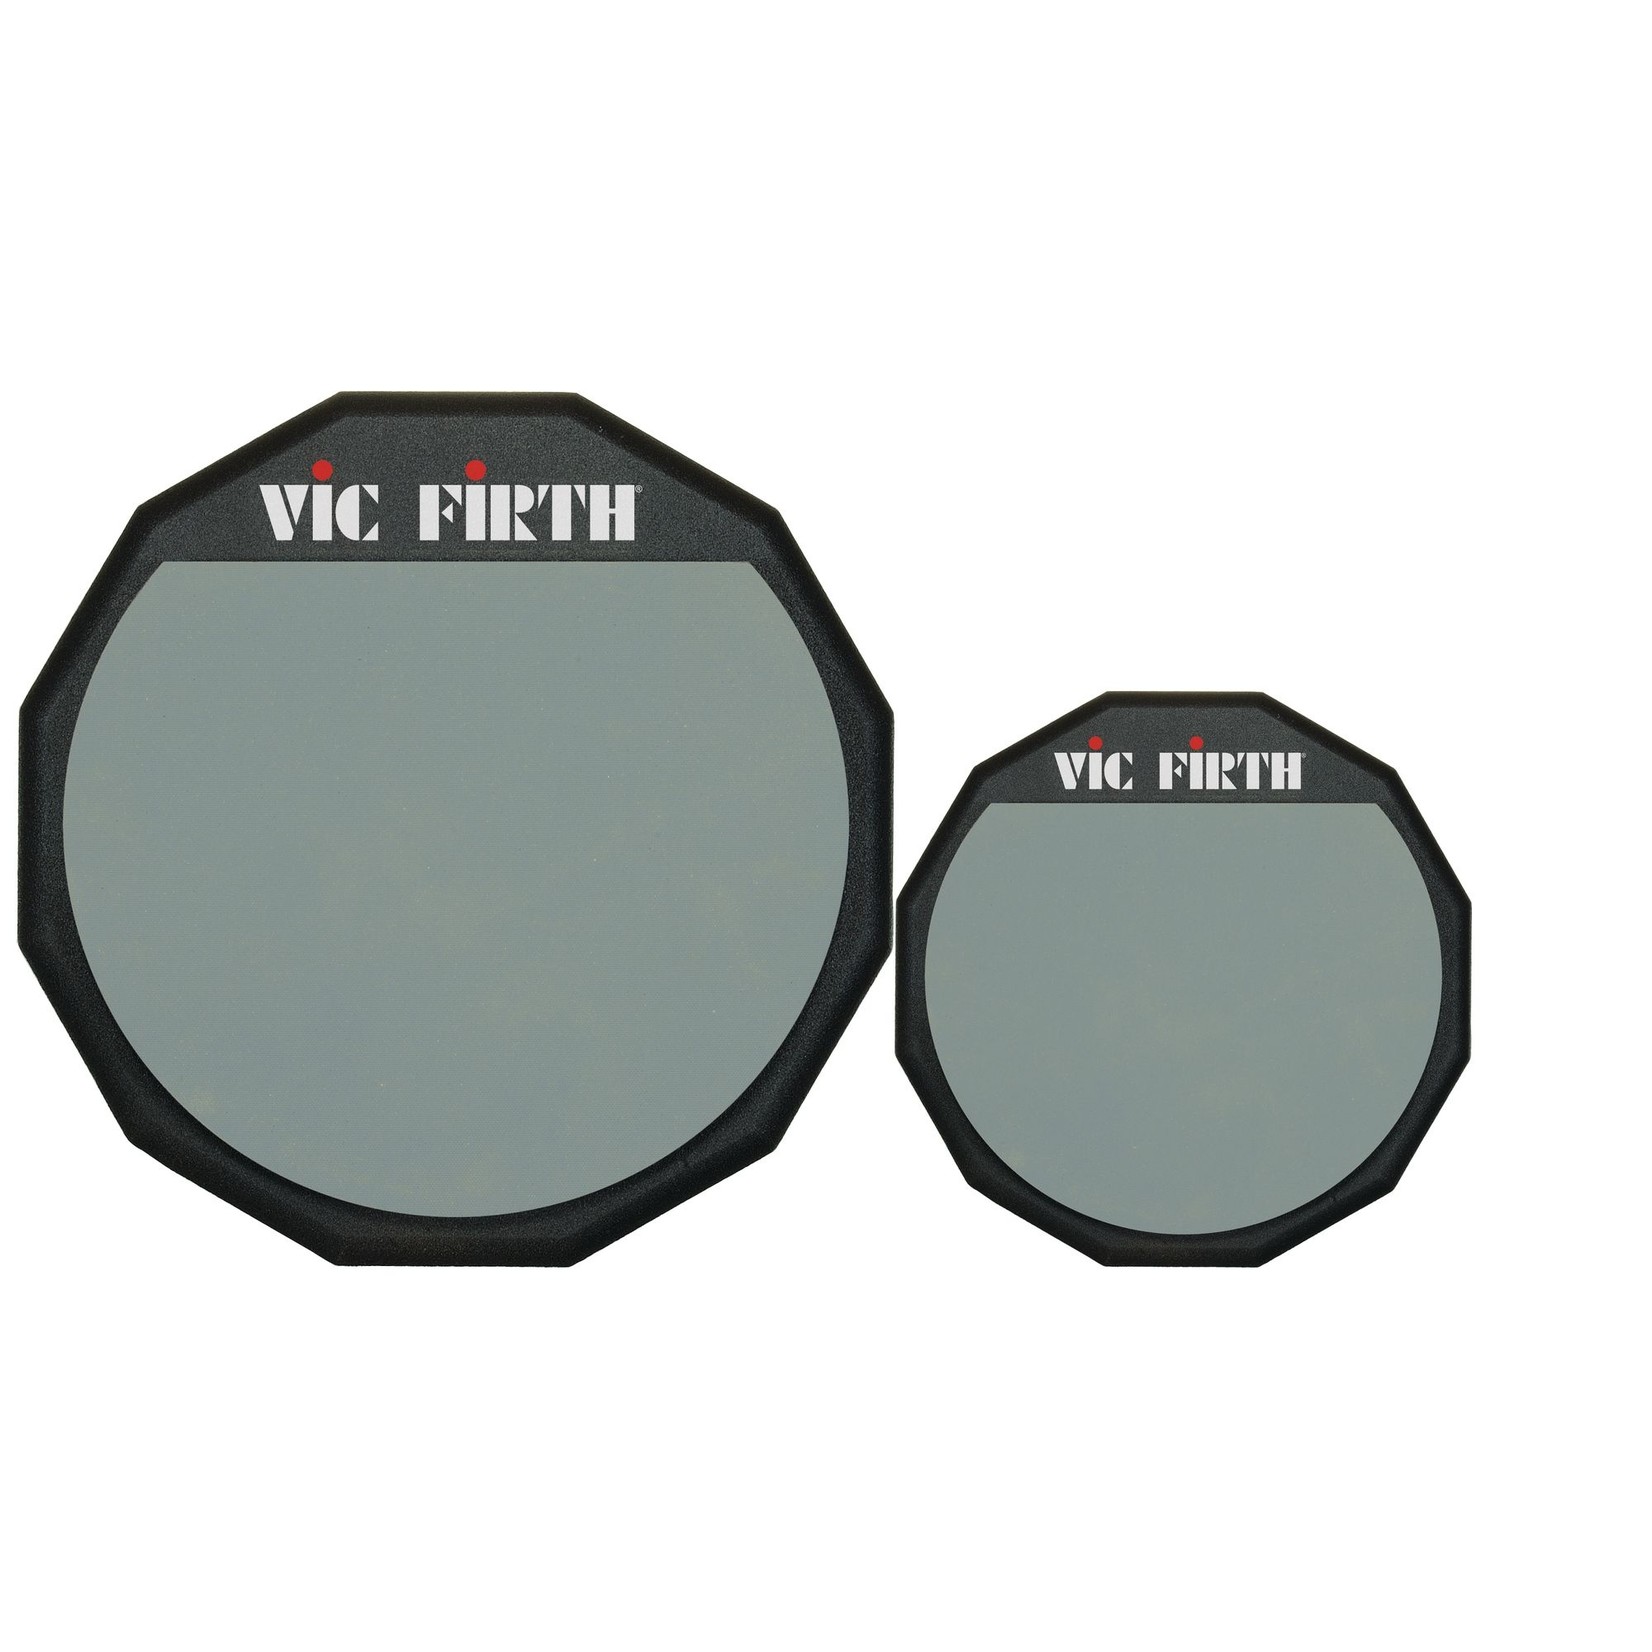 Vic Firth Vic Firth 6'' Single-Sided Practice Pad